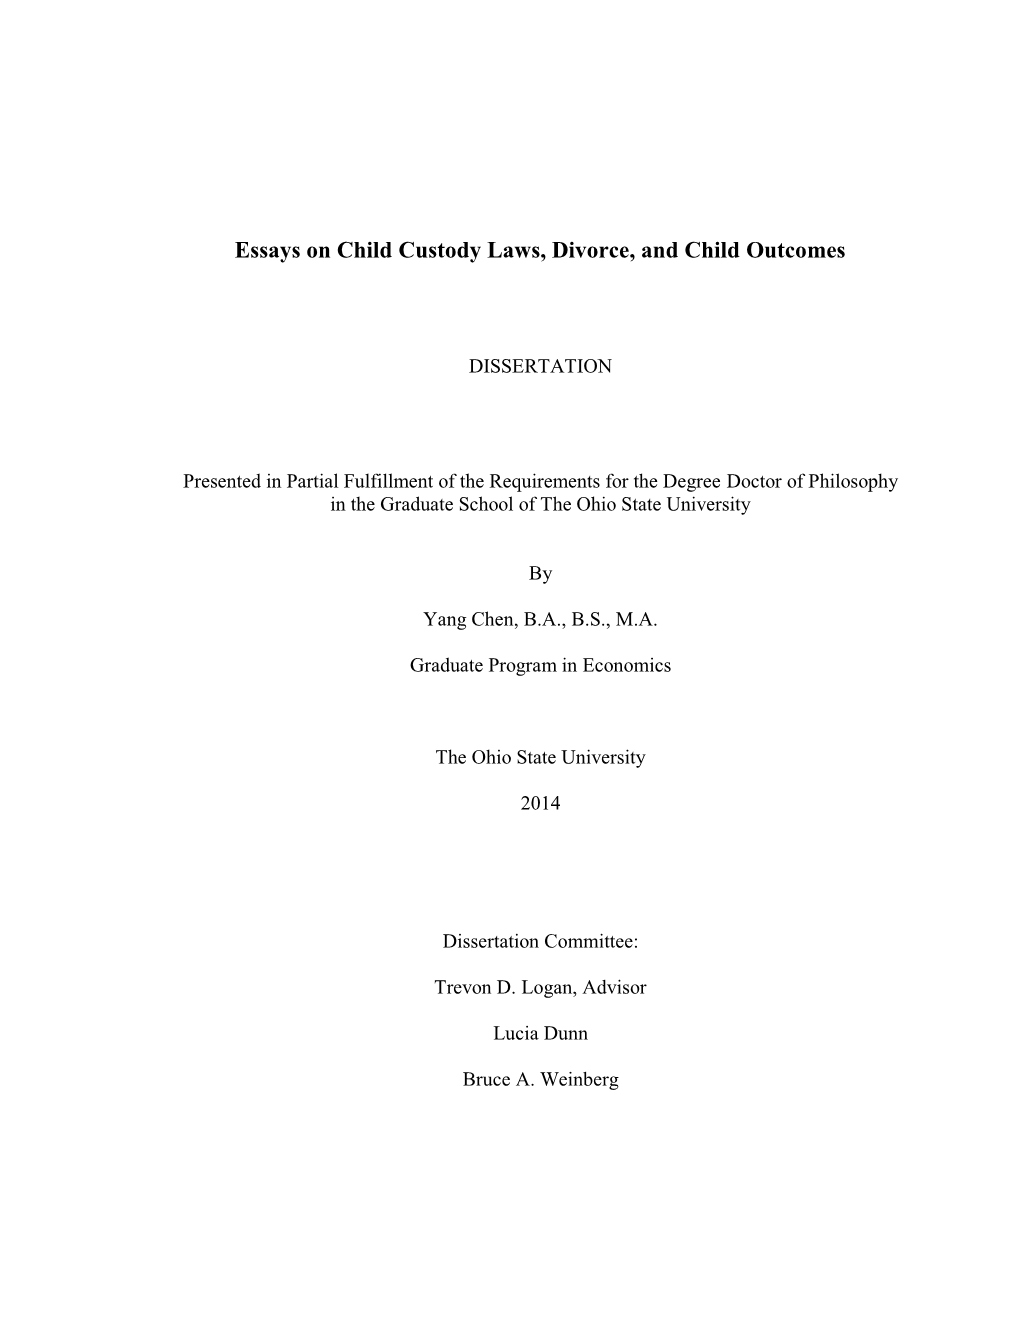 Essays on Child Custody Laws, Divorce, and Child Outcomes